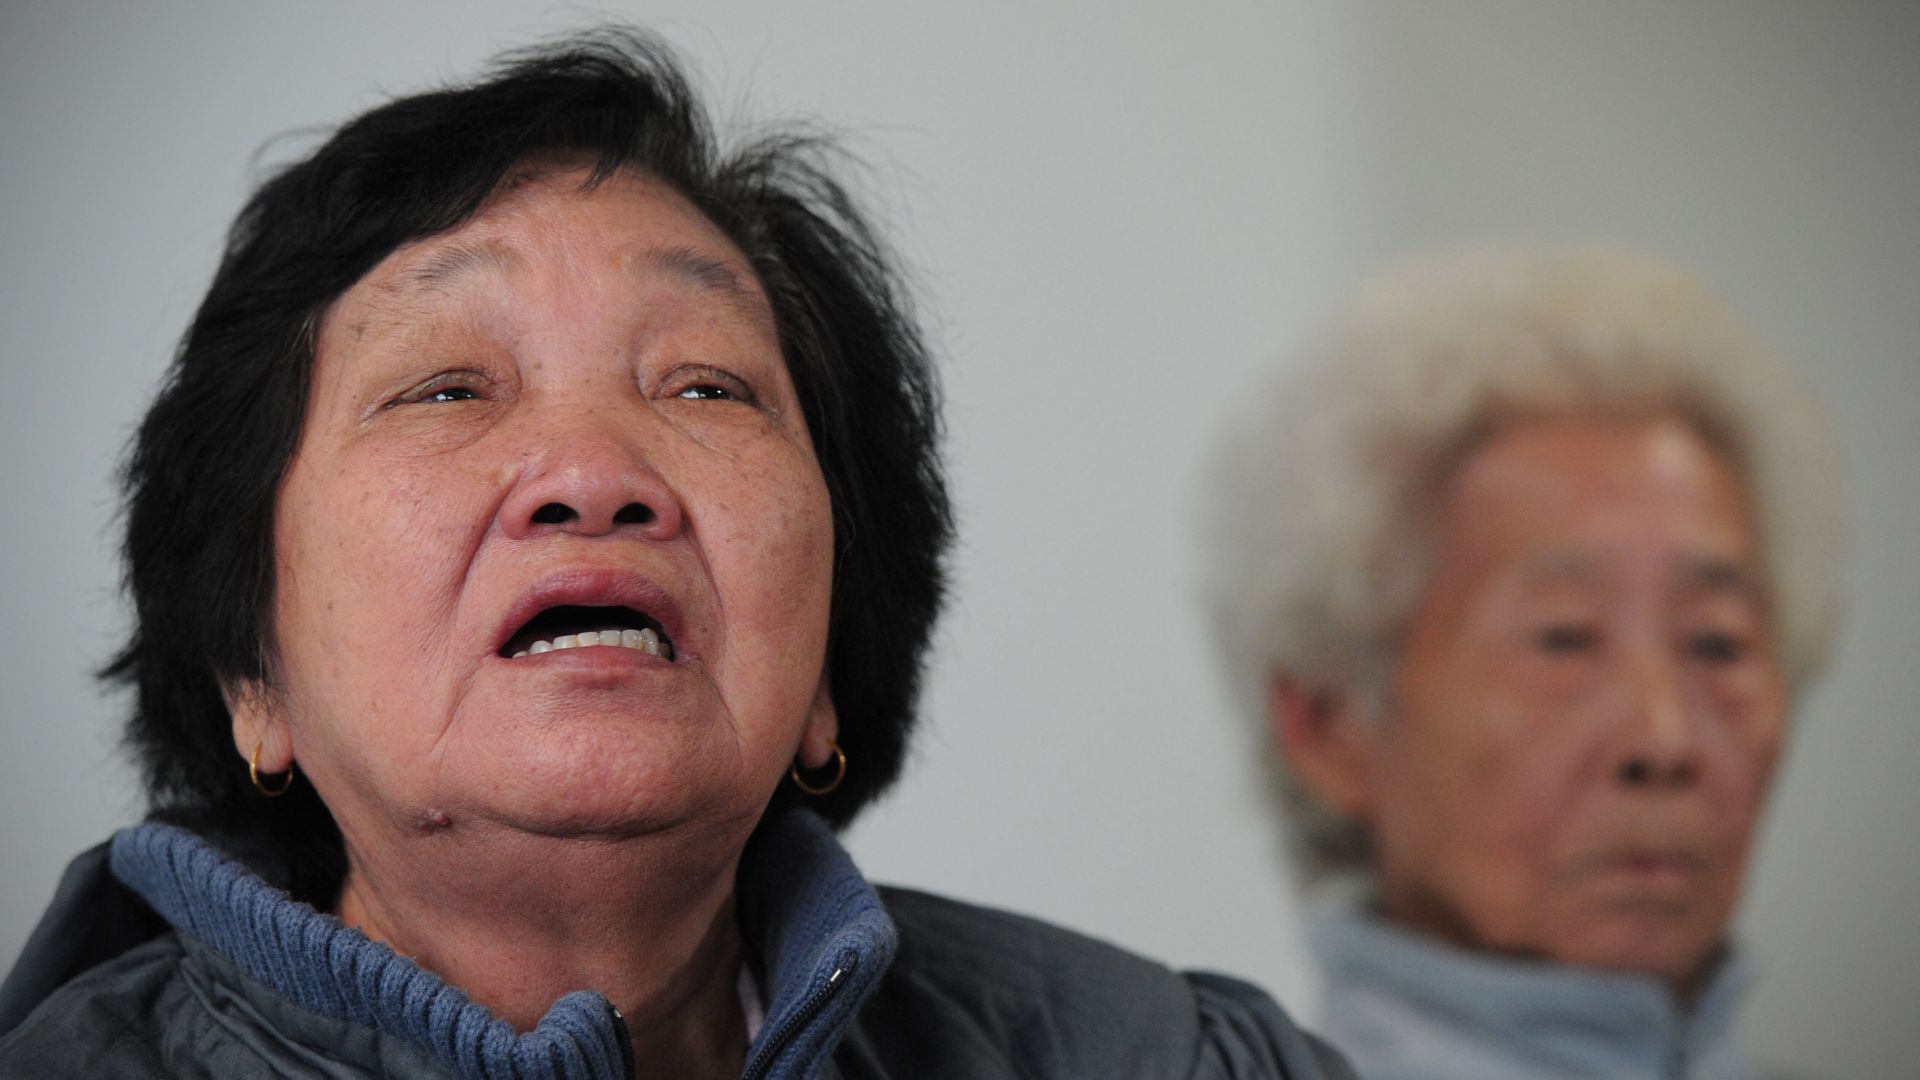 CORRECTING FIRST NAME Chong Koon Ying (L) and Lim Ah Yin a relatives relatives of unarmed Malaysian rubber plantation workers killed in Batang Kali in 1948, attend a press conference with their lawyers in London on May 7, 2012 ahead of their High Court bid to force a public inquiry into the killings. The surviving relatives of the victims are calling for a public inquiry into the 24 deaths which occurred after a patrol of Scots Guards surrounded and entered the village Batang Kali on December 11, 1948. AFP PHOTO/CARL COURT (Photo by CARL COURT / AFP)